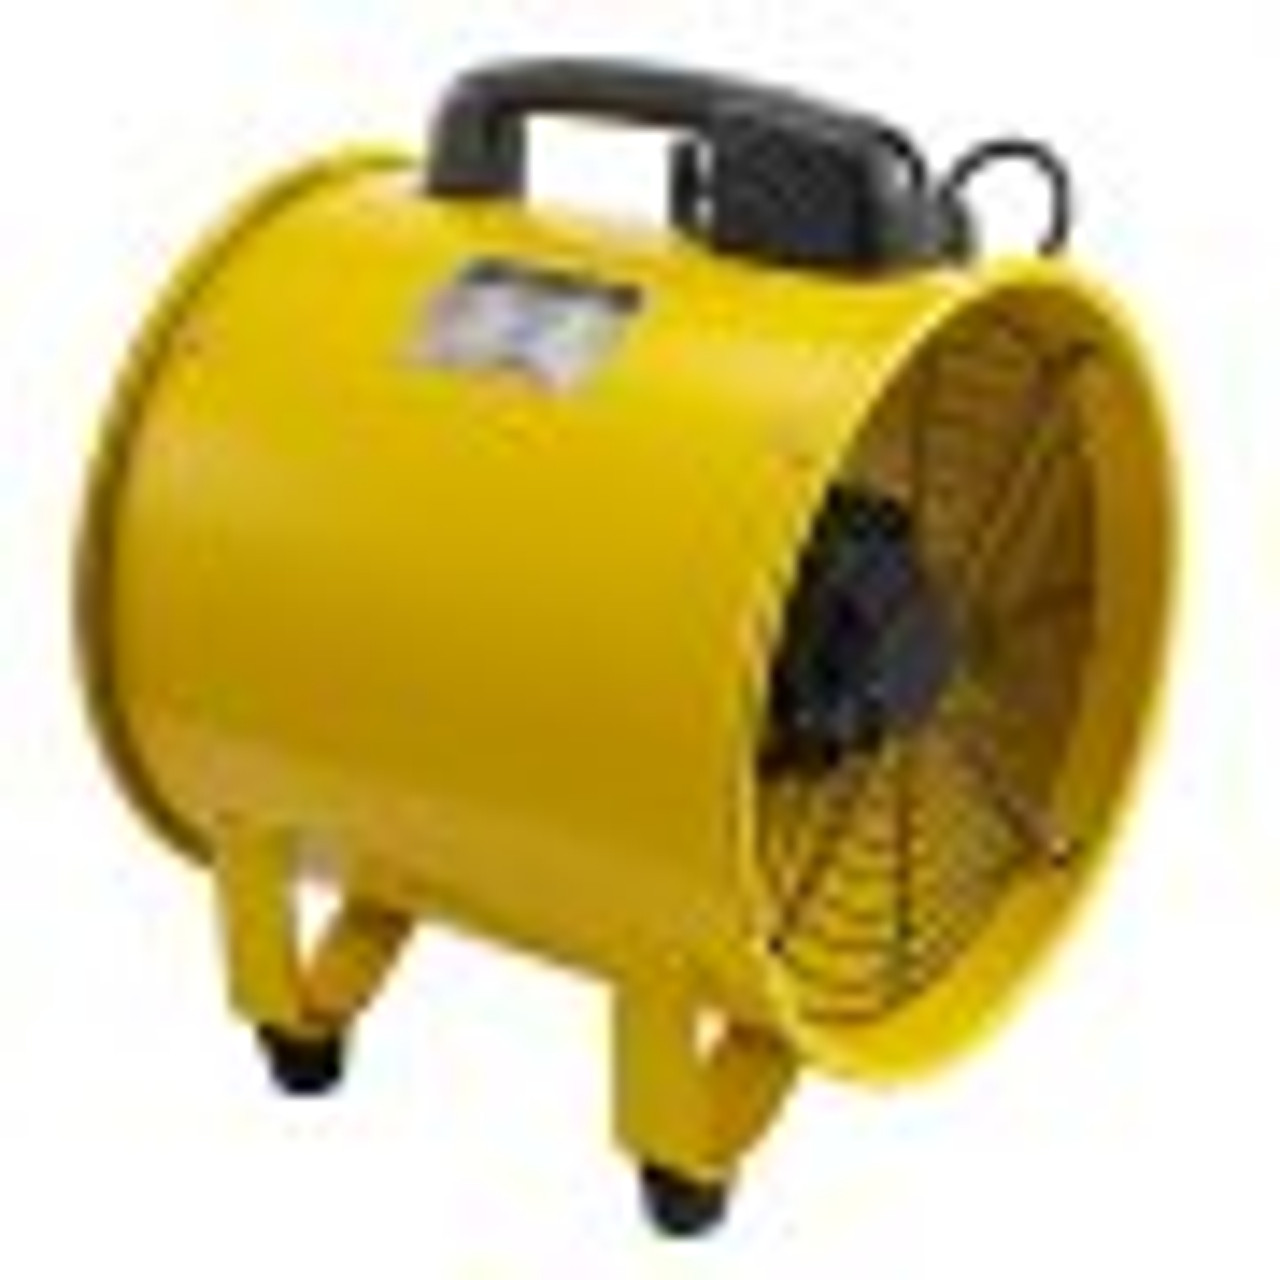 Utility Blower Fan, 12 Inches, 550W 1471 & 2295 CFM High Velocity Ventilator w/ 16 ft/5 m Duct Hose, Portable Ventilation Fan, Fume Extractor for Exhausting & Ventilating at Home and Job Site